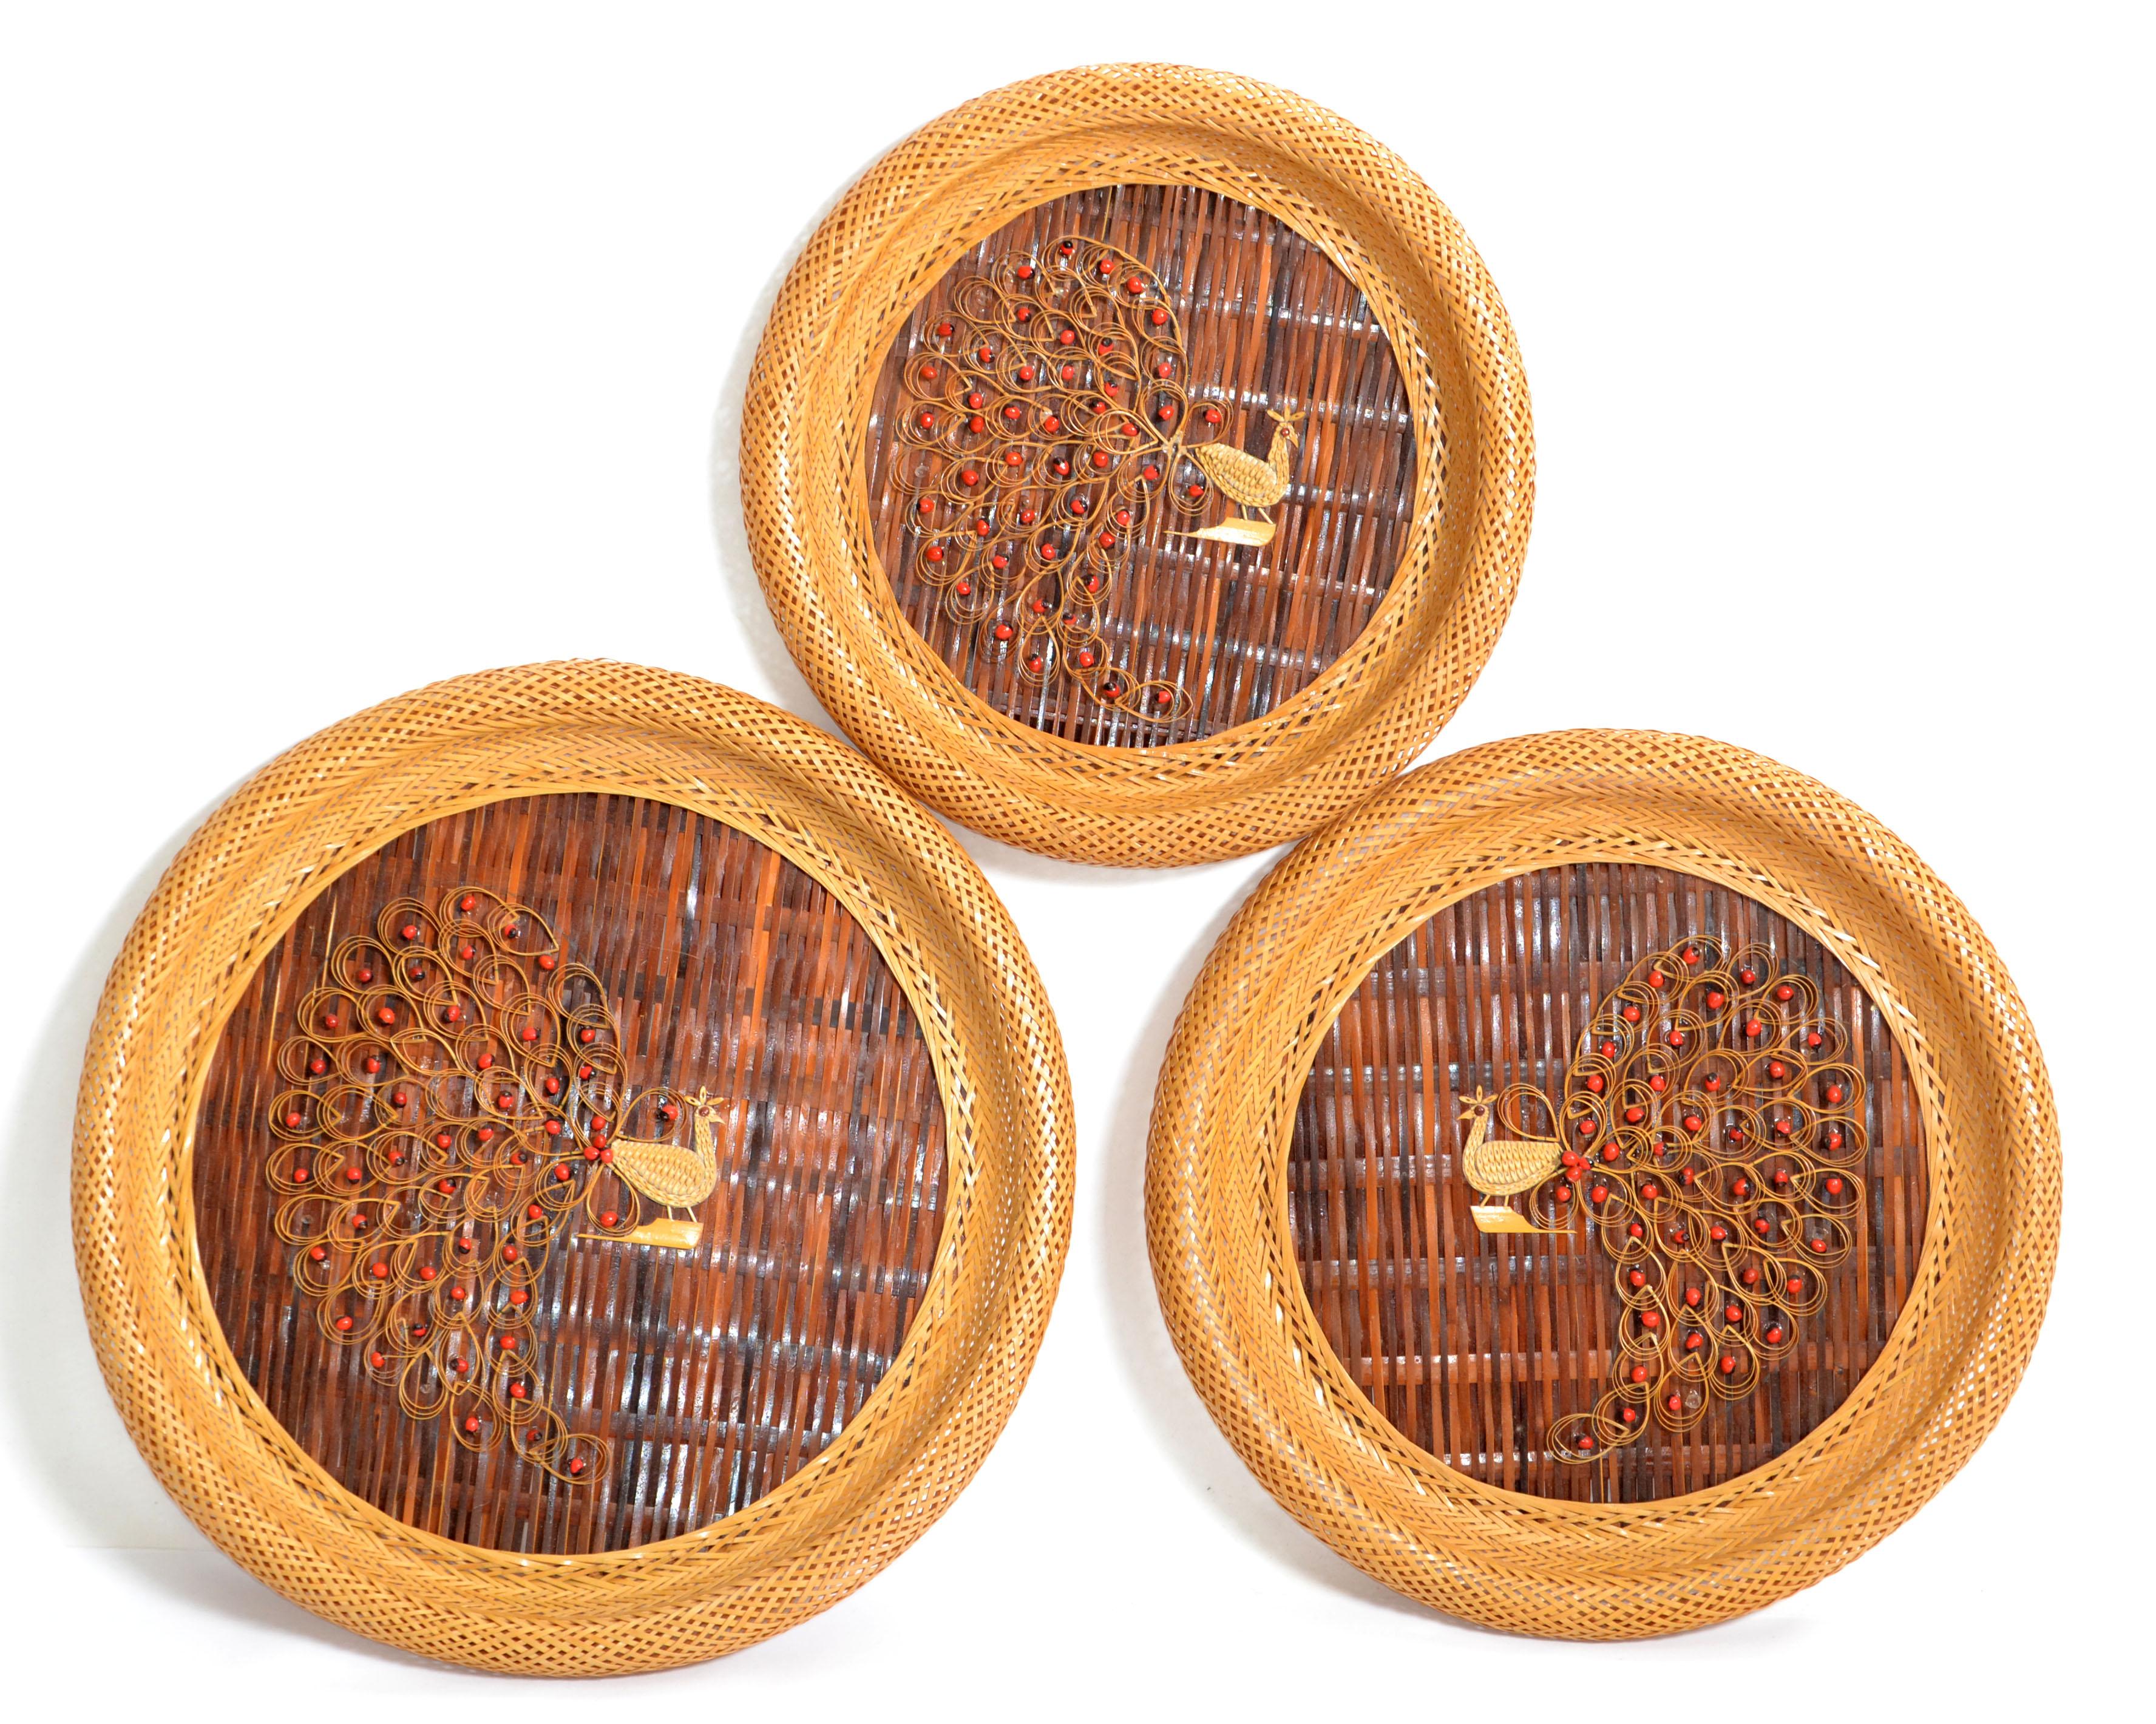 3 Nesting Decorative Handcrafted Cane & Rattan Beaded Wall Plates Peacock Motif For Sale 2